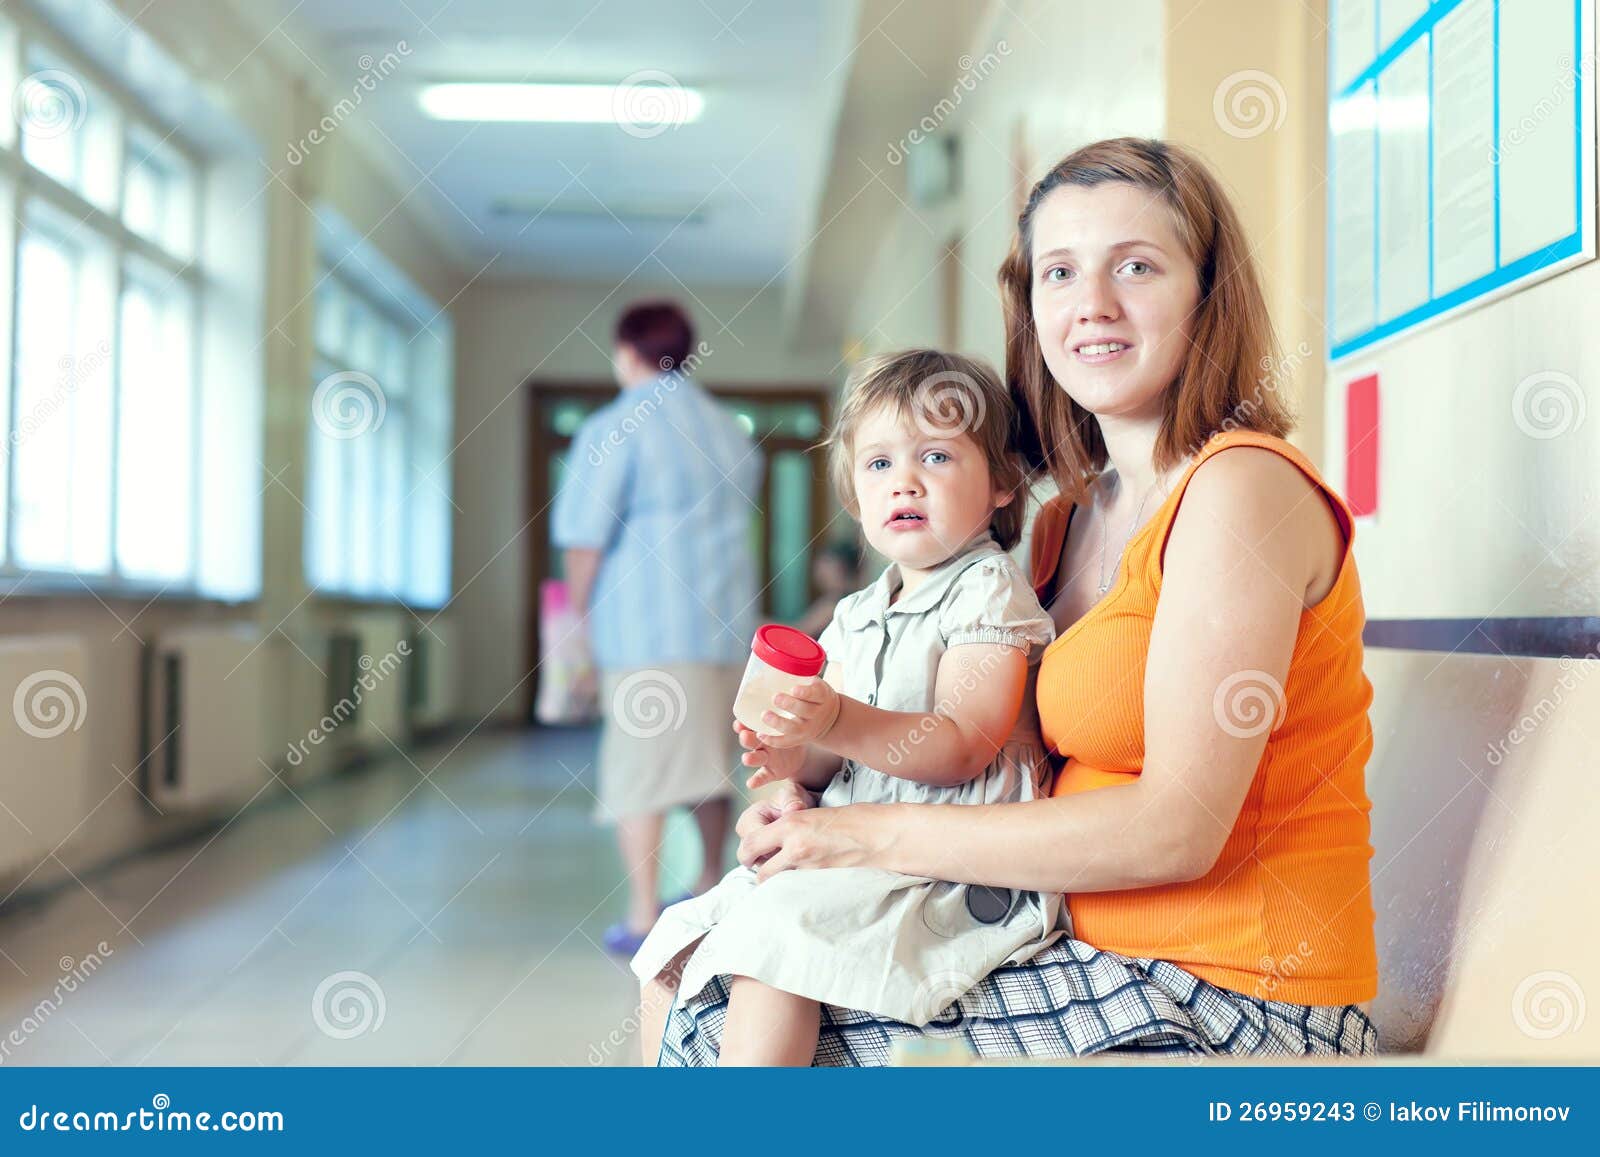 woman and child with urinalysis sample